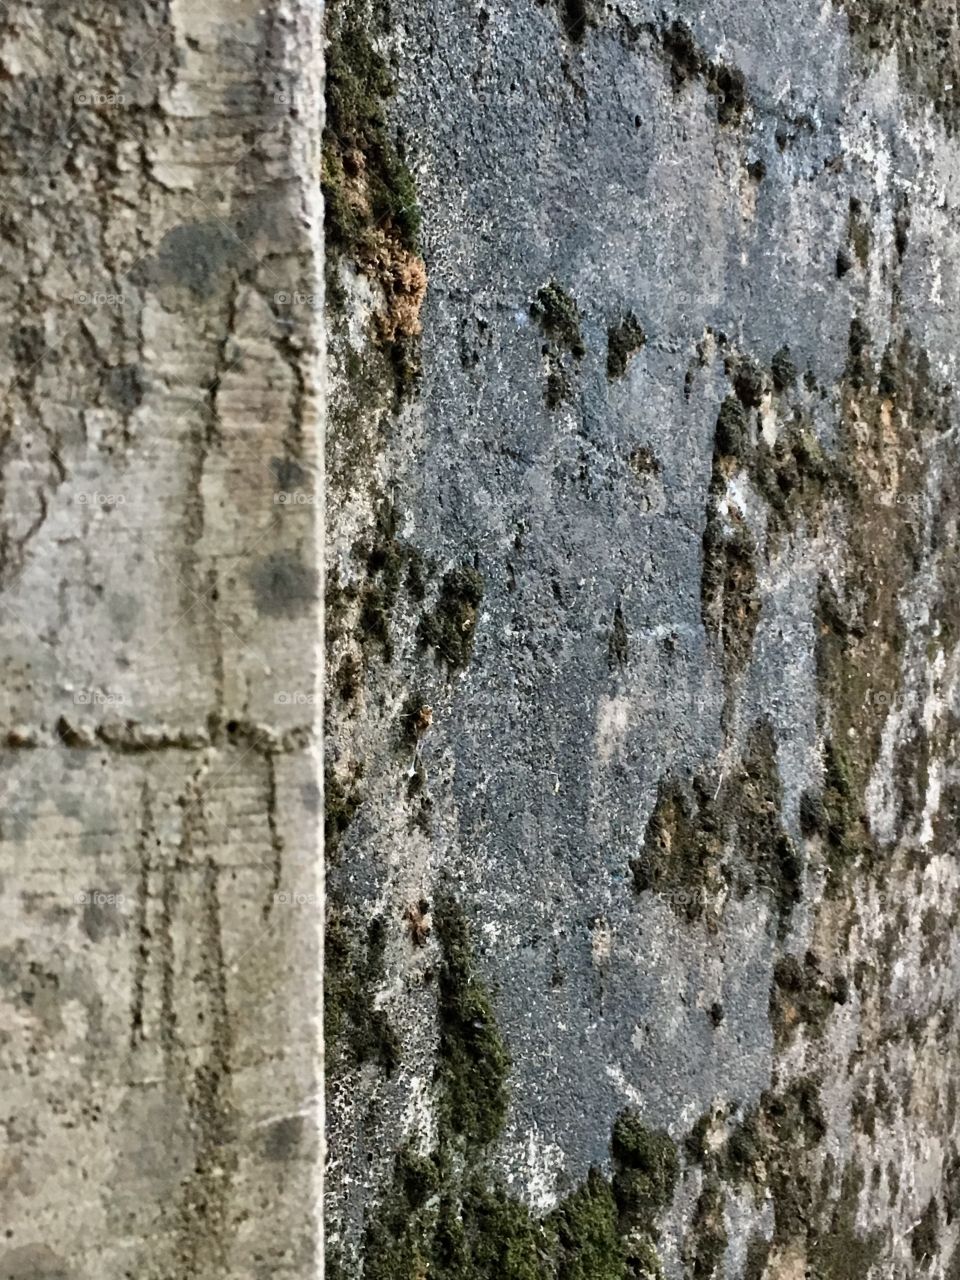 A moss covered wall showing the decay and texture of the cement 